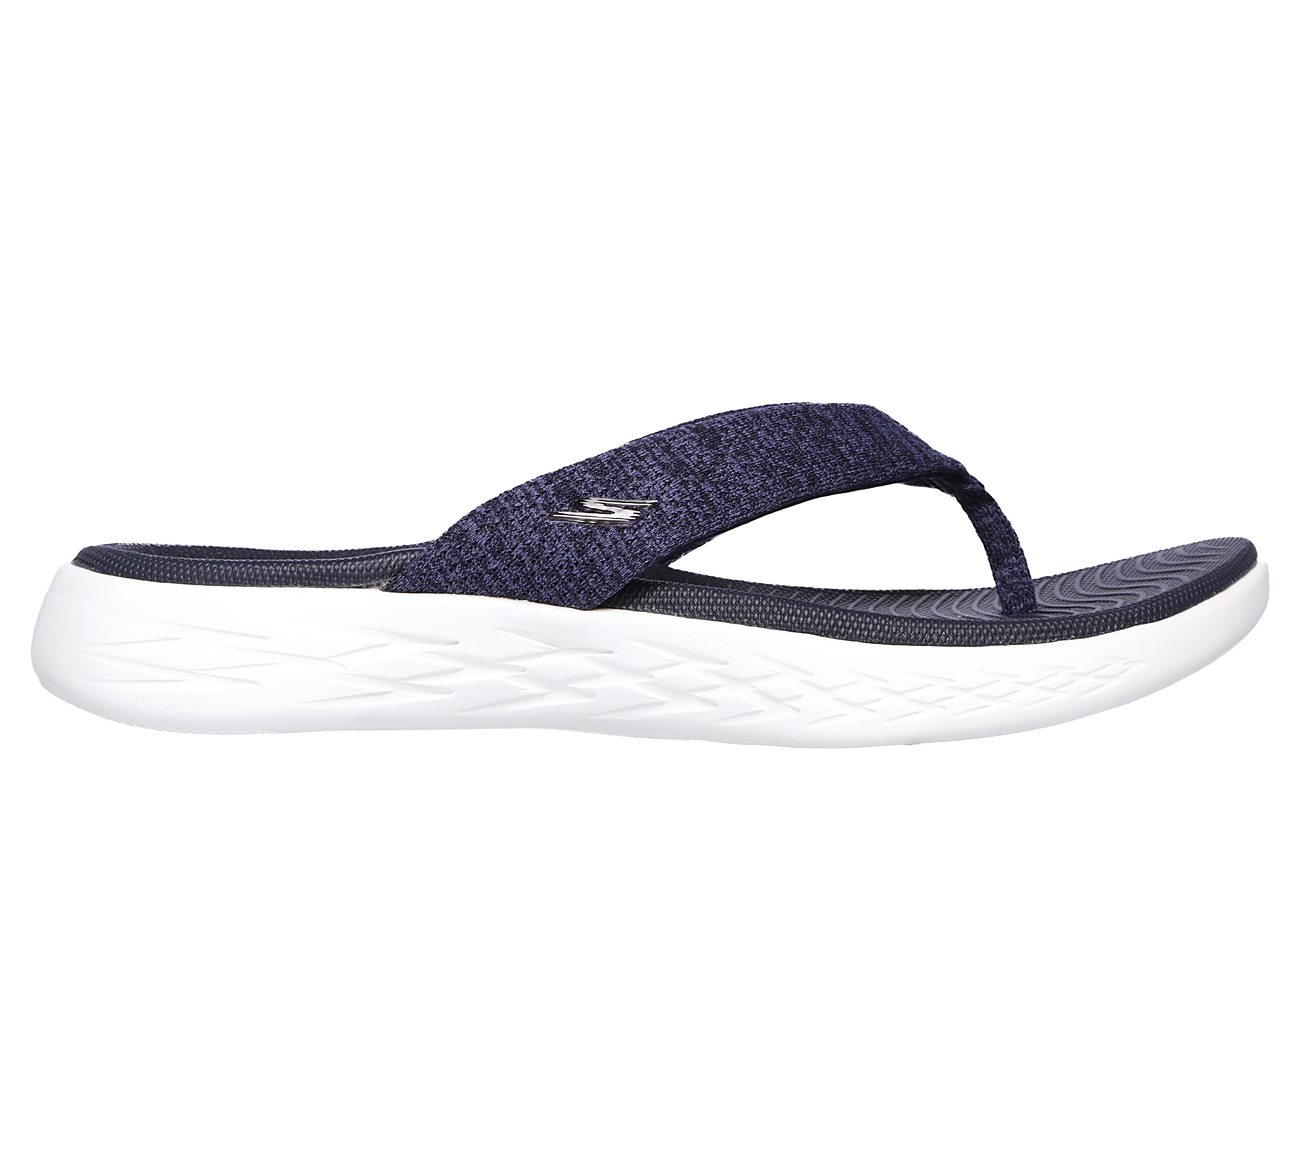 ON-THE-GO 600 - PREFERRED, NAVY/WHITE Footwear Right View